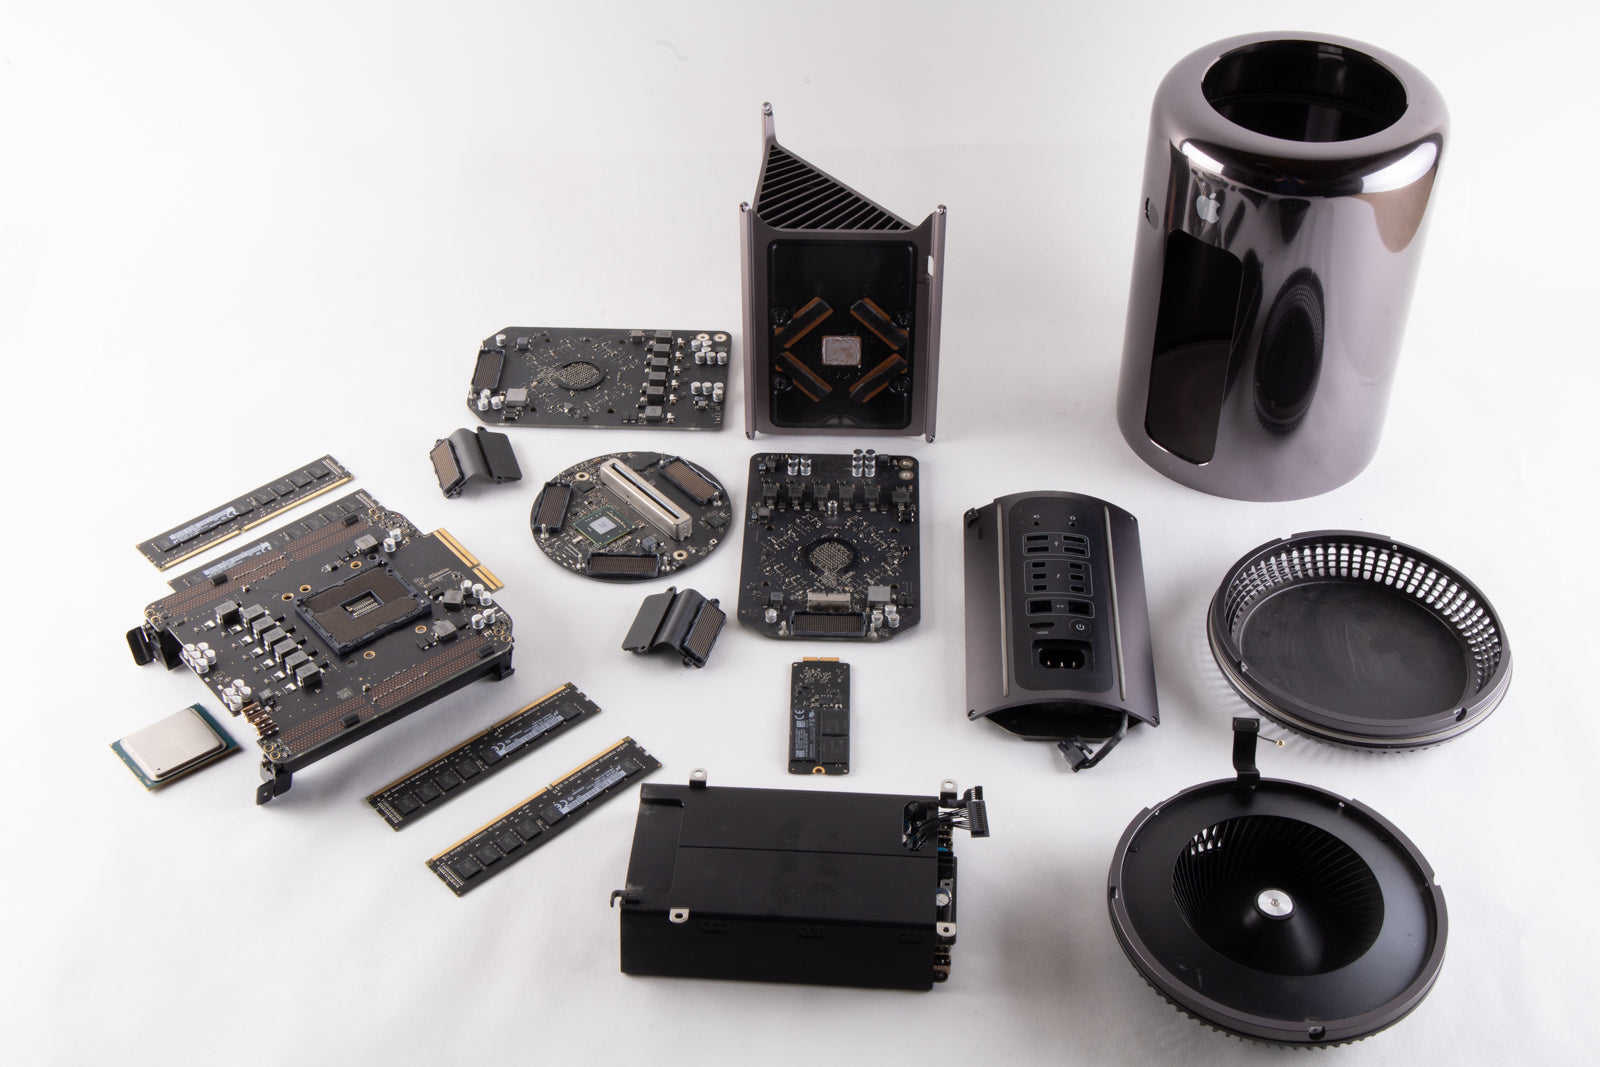 2013 Mac Pro 6,1 Exploded view of parts and components.